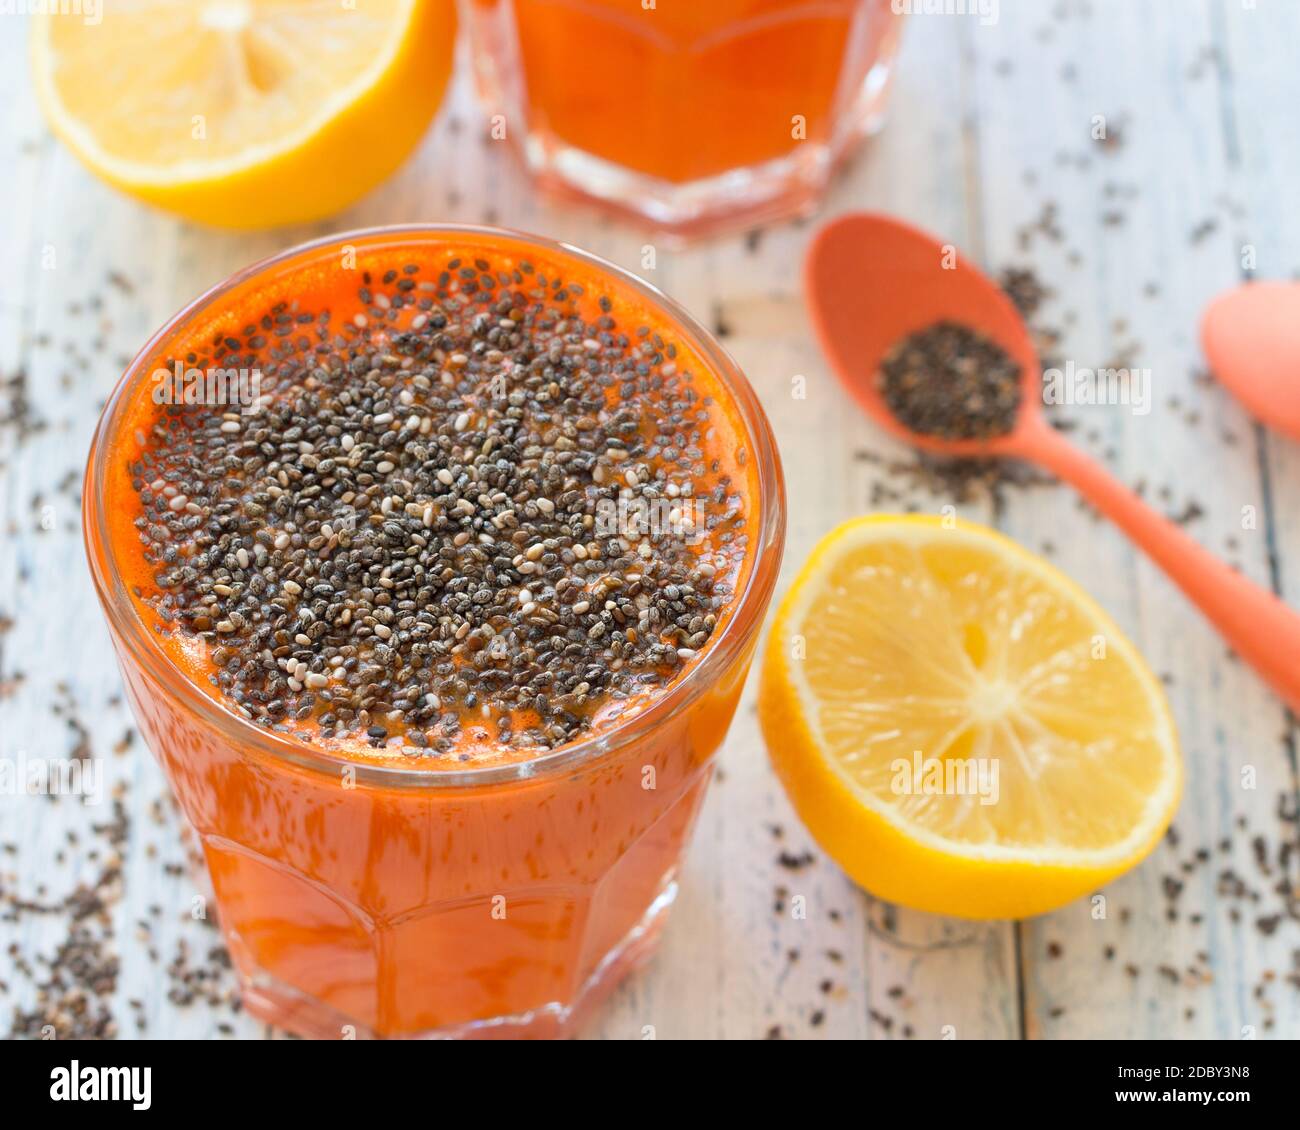 Carrot cocktail with lemon and chia seeds in a glasses on a light blue background, selective focus. Healthy delicious drink Stock Photo